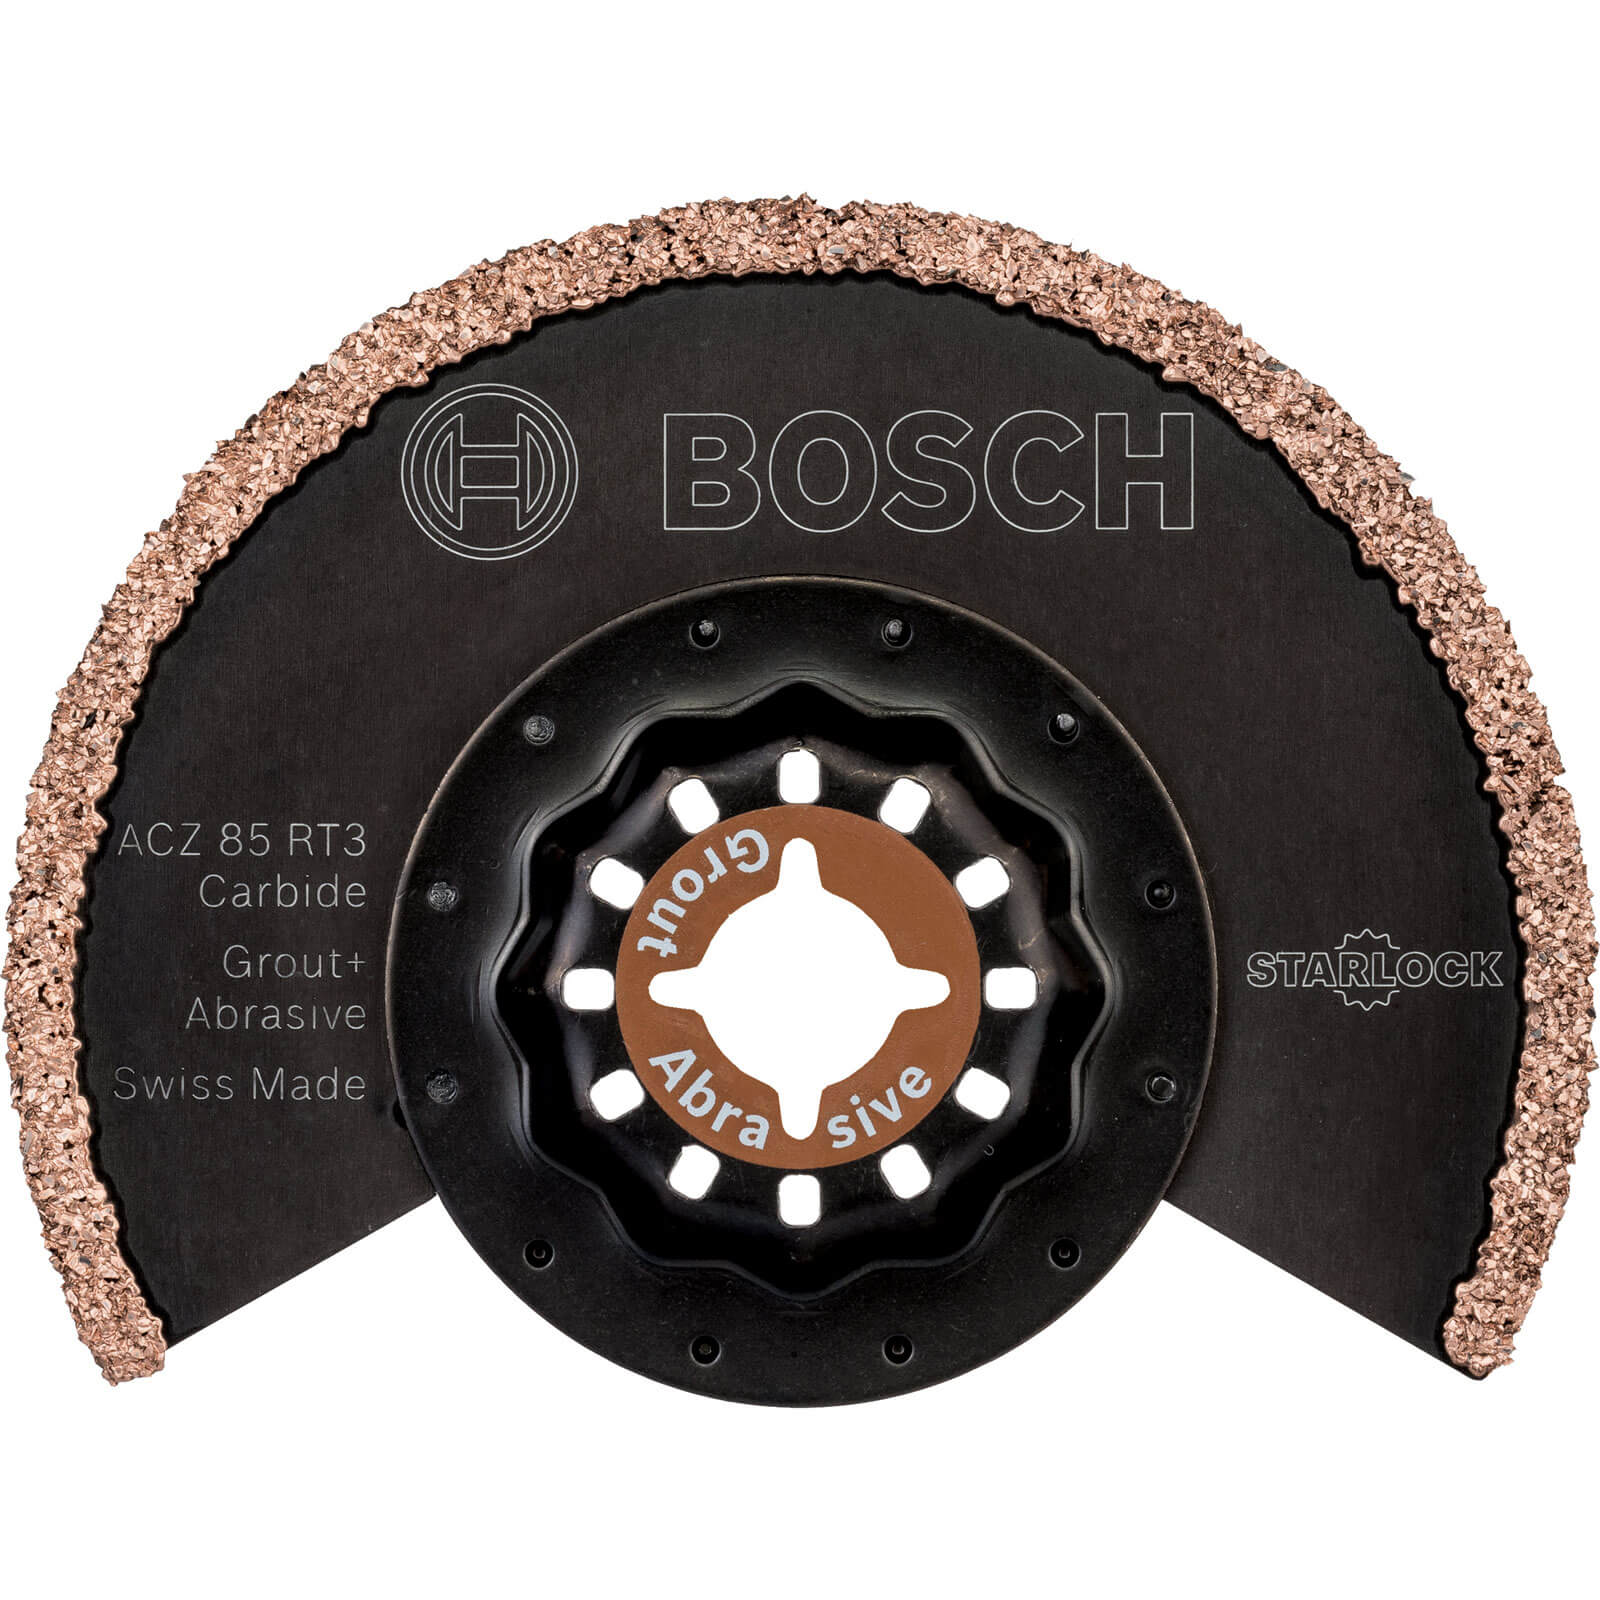 Photo of Bosch Acz 85 Rt3 Grout And Masonry Oscillating Multi Tool Segment Saw Blade 85mm Pack Of 10